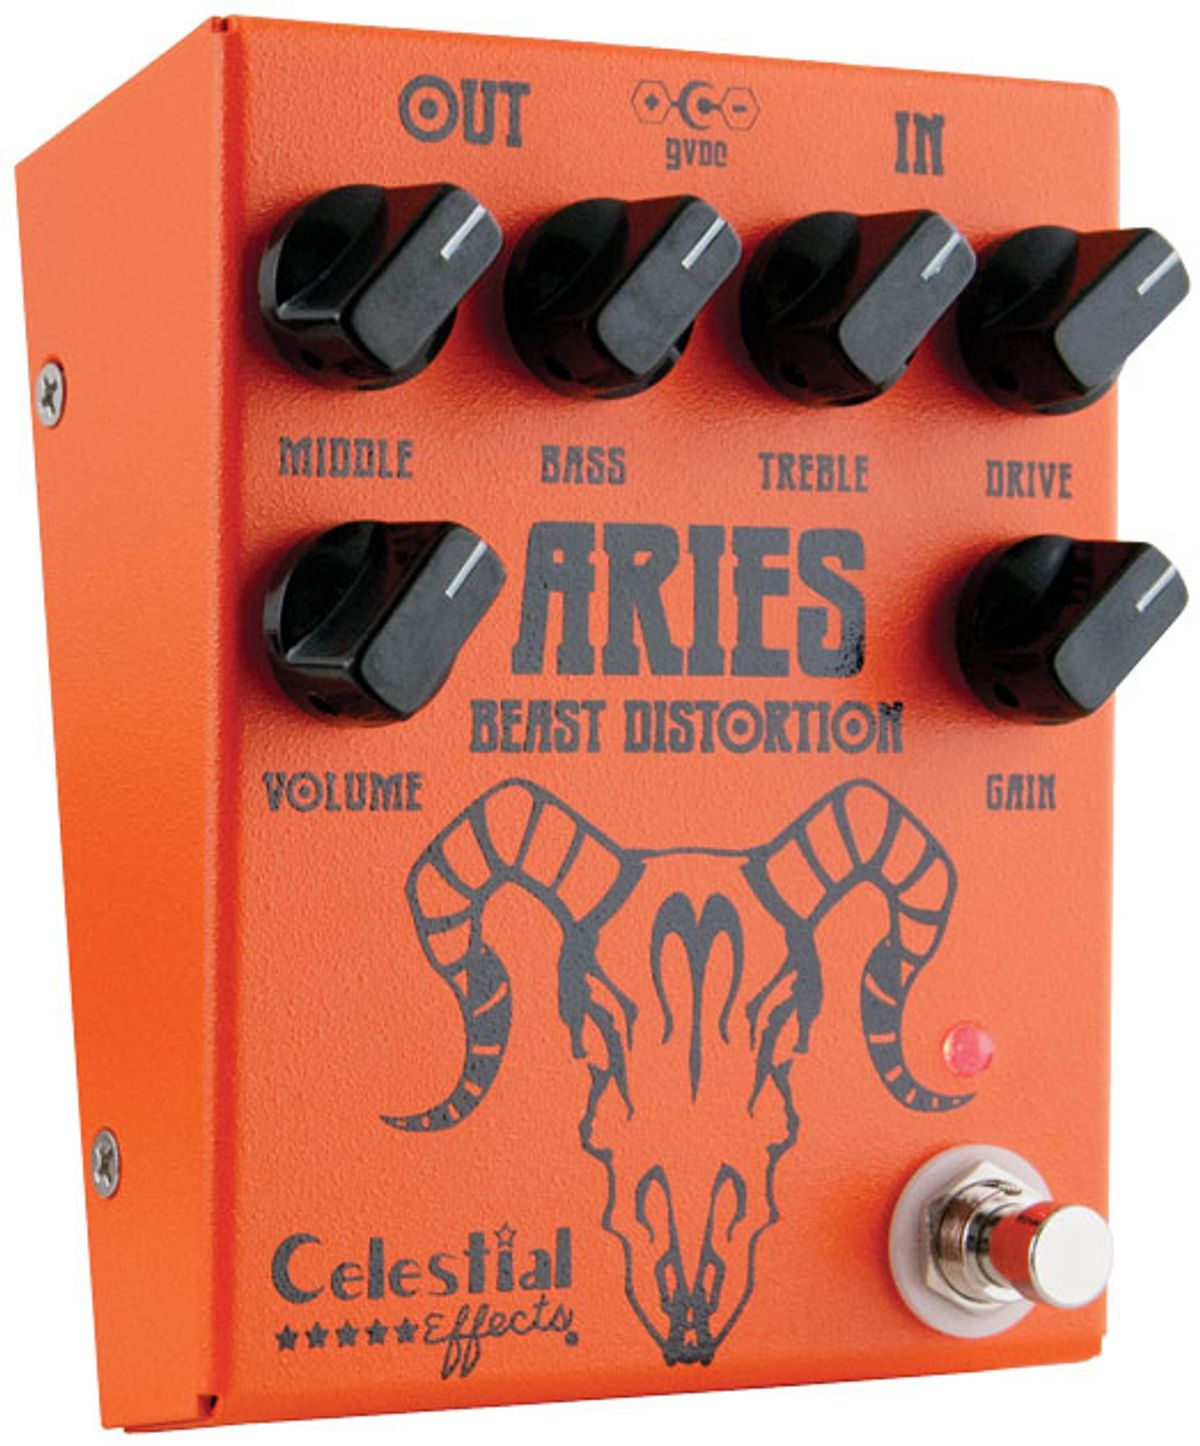 Celestial Effects Aries Beast Distortion Review